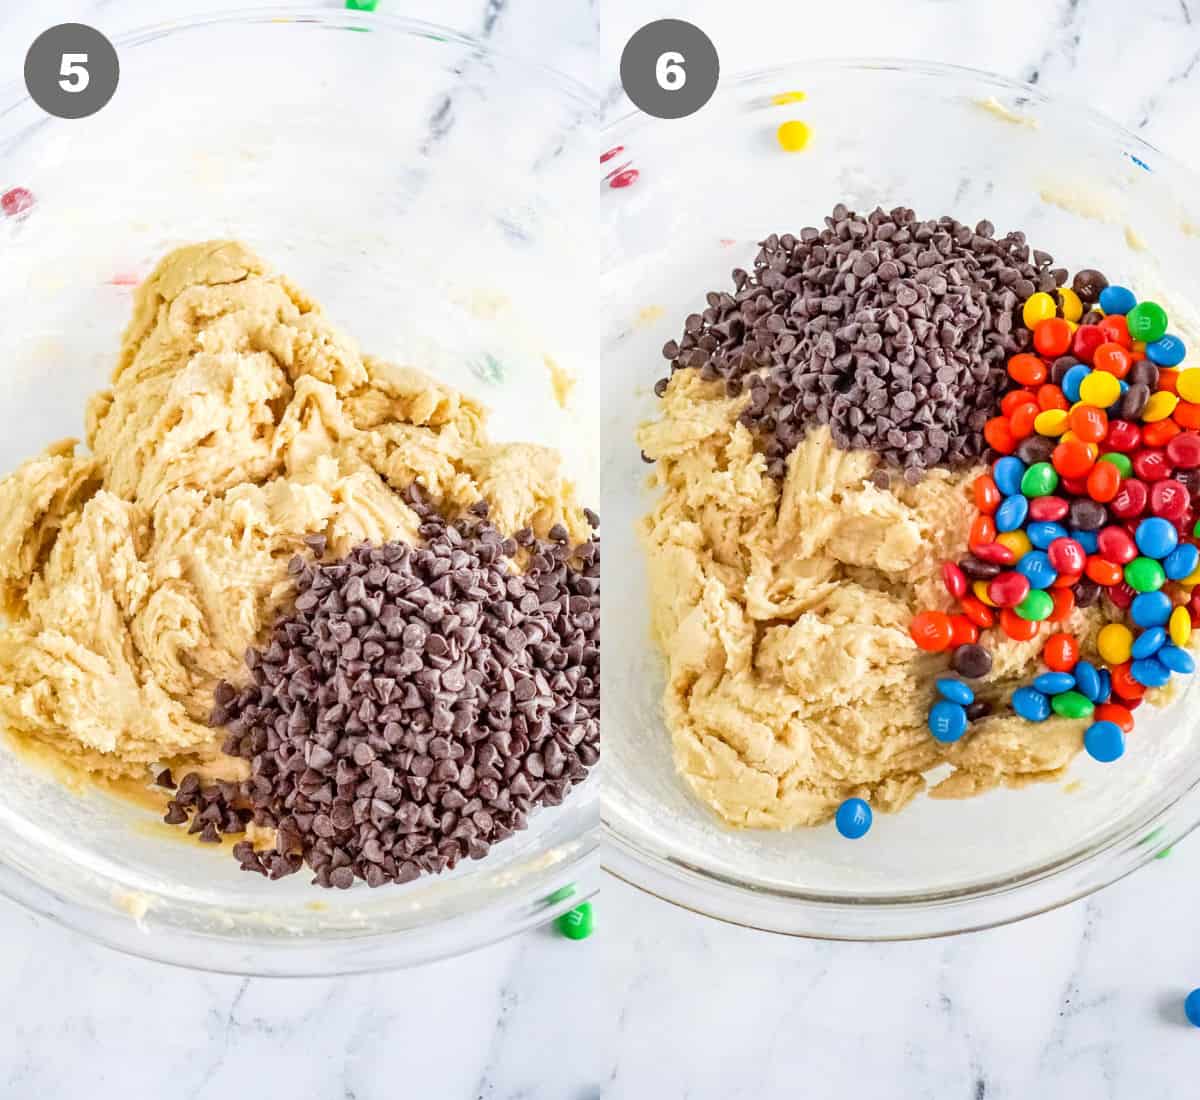 Mini chocolate chips and m&m's added in.